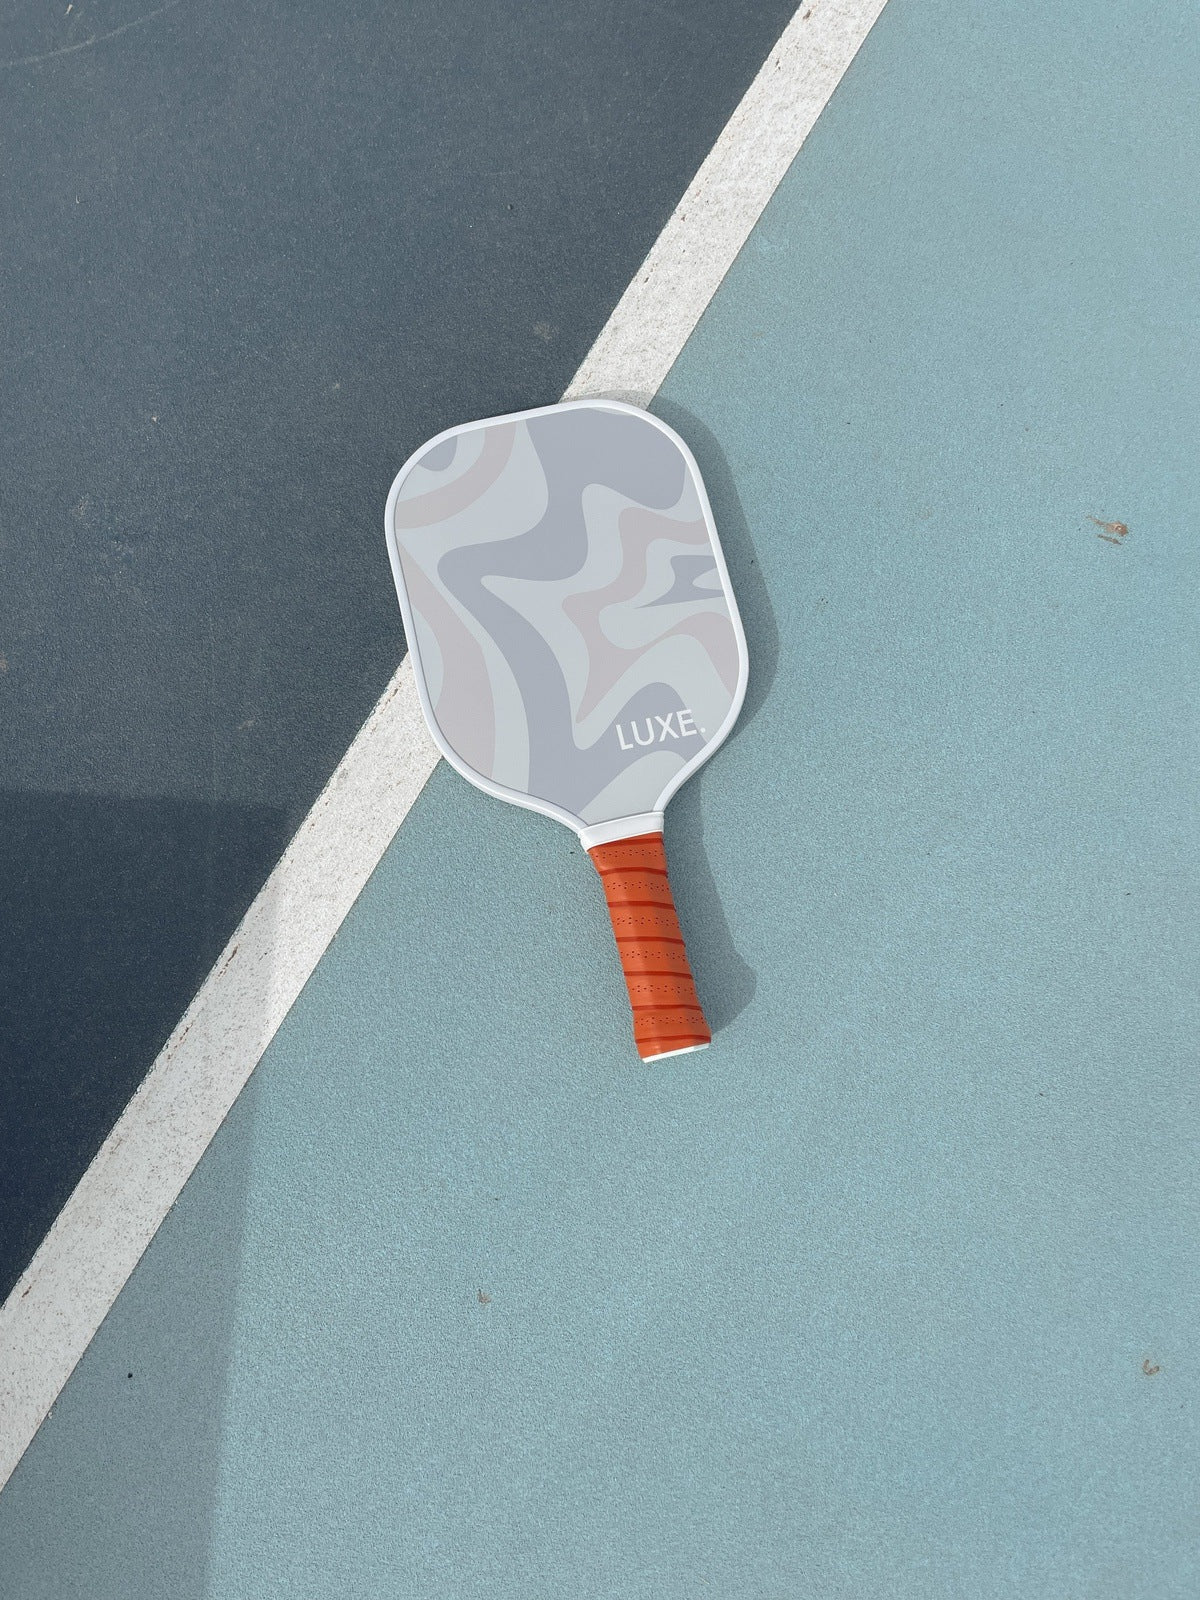 Squiggle LUXE Pickleball Paddle. Cute and aesthetic pickleball paddles